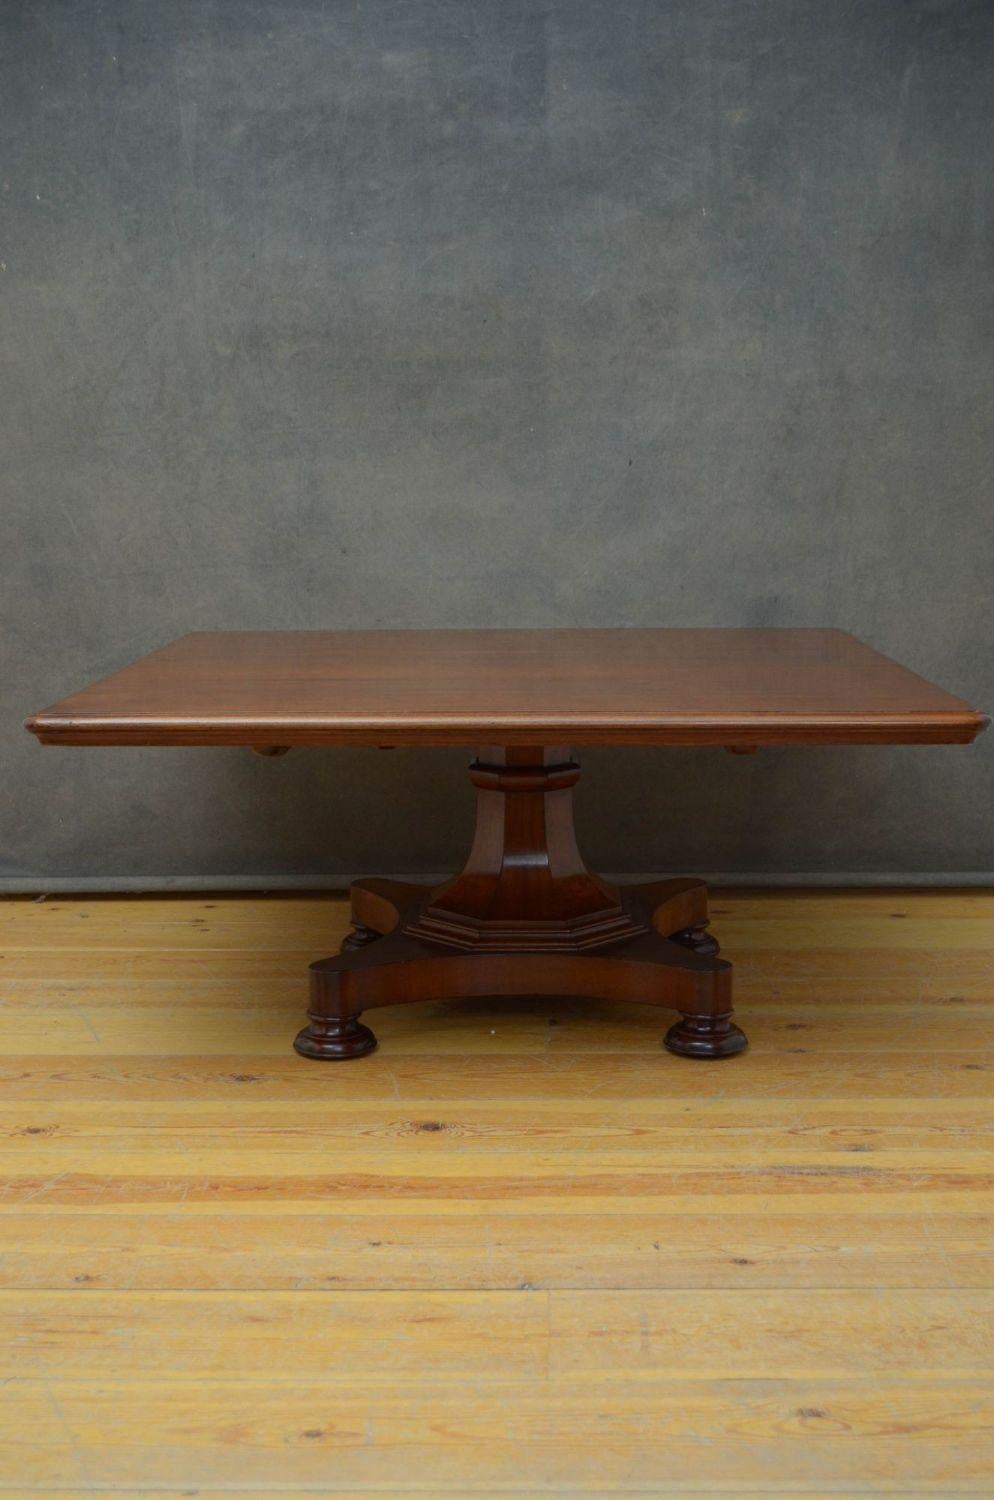 Sn5400 Simple and elegant William IV mahogany coffee table, having figured mahogany top with moulded edge above flat faceted column terminating in shaped base and original bun feet. This antique table has been reduced to coffee table size, it has